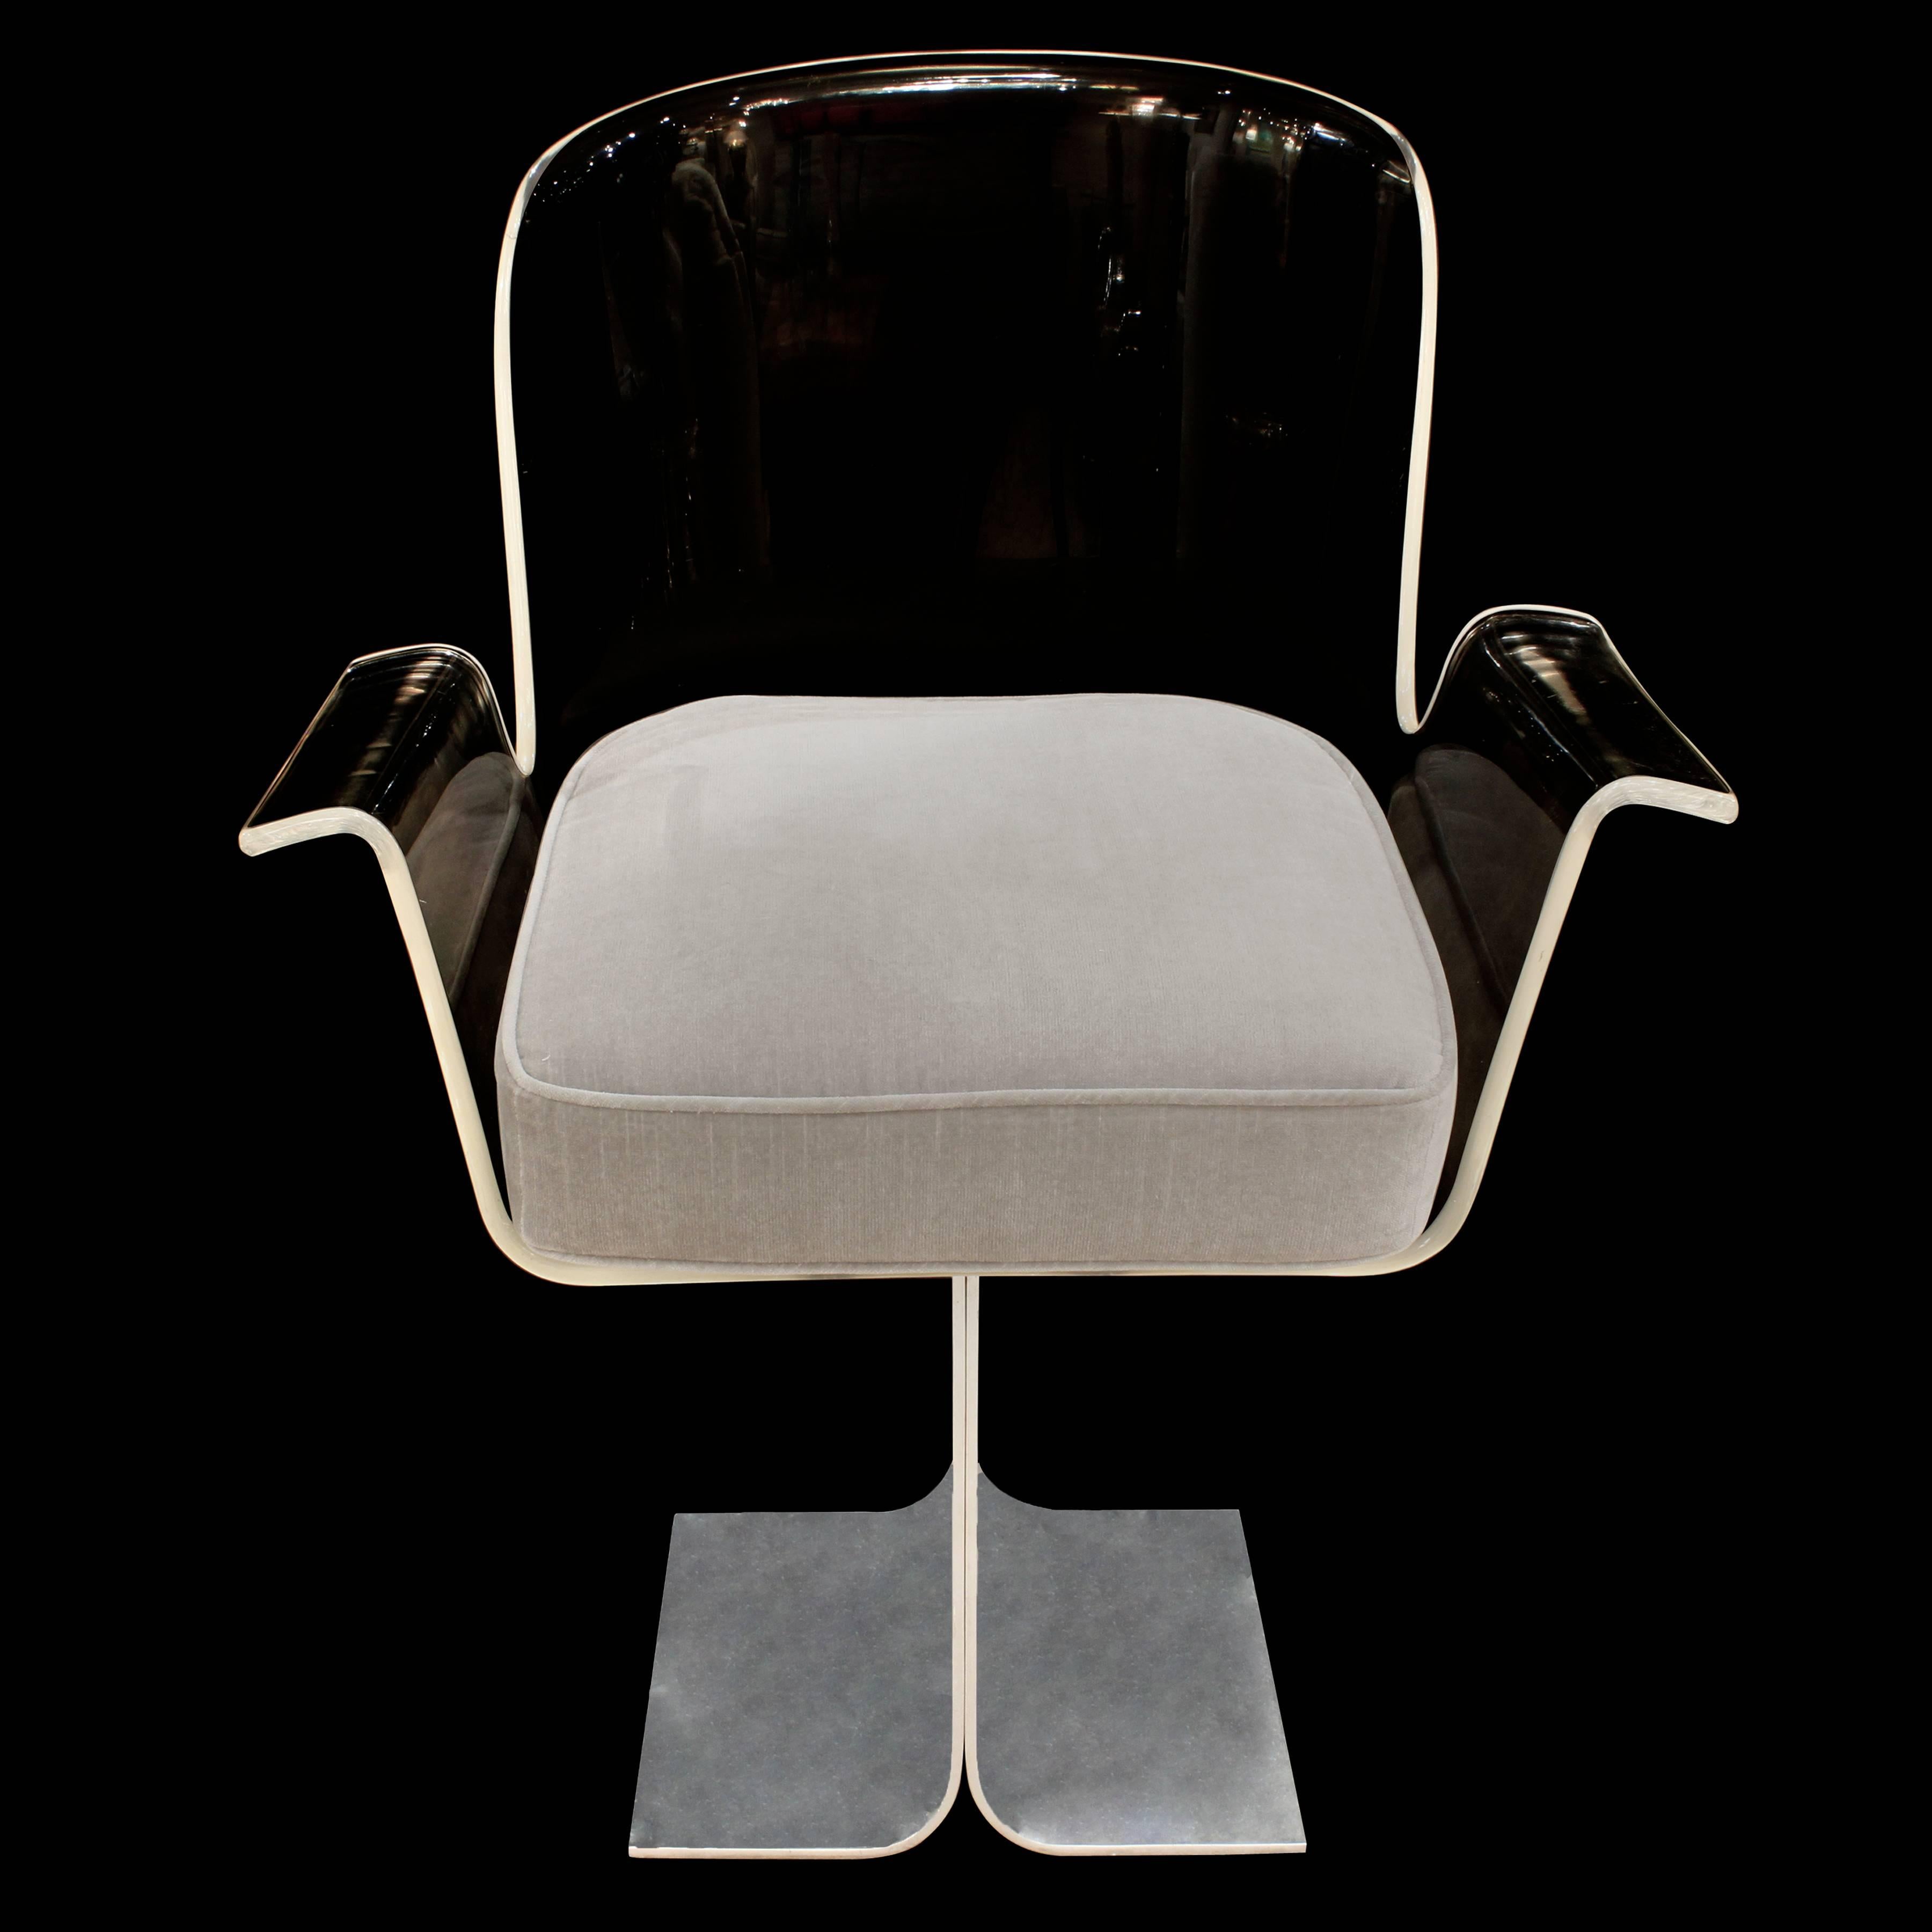 Sculptural desk chair No. 171 with swivelling Lucite seat and cushion on polished aluminium base by I. M. Rosen for The Pace Collection, American 1970s.